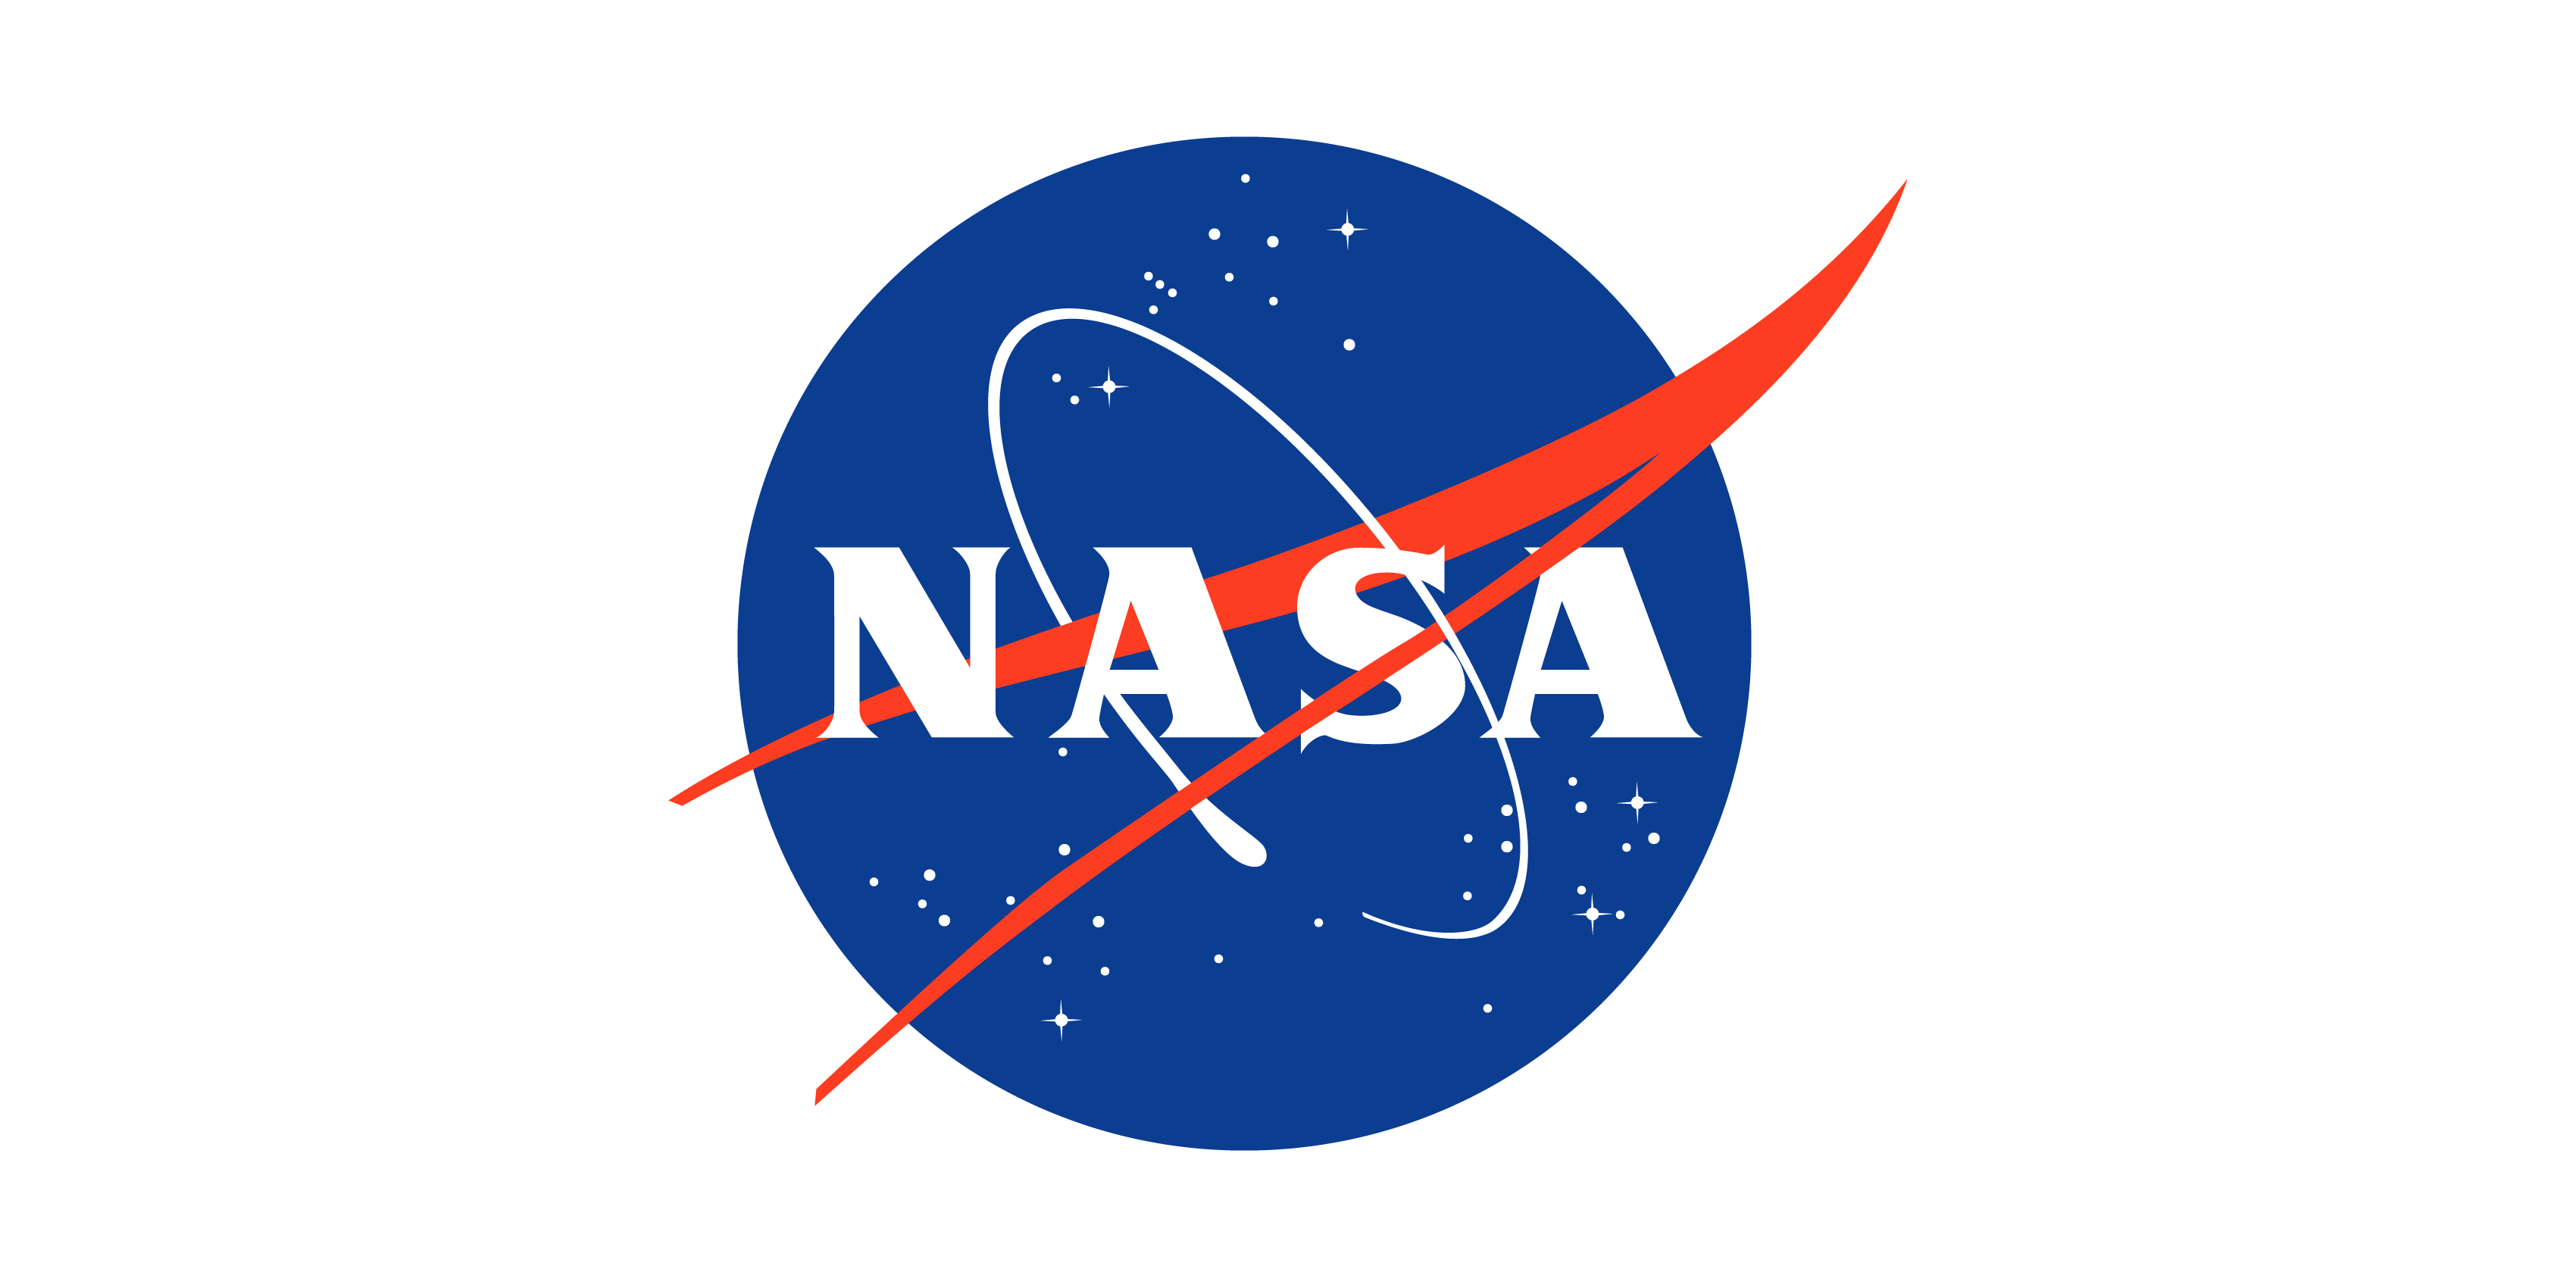 File:Voyager - mission logo.png - Wikimedia Commons